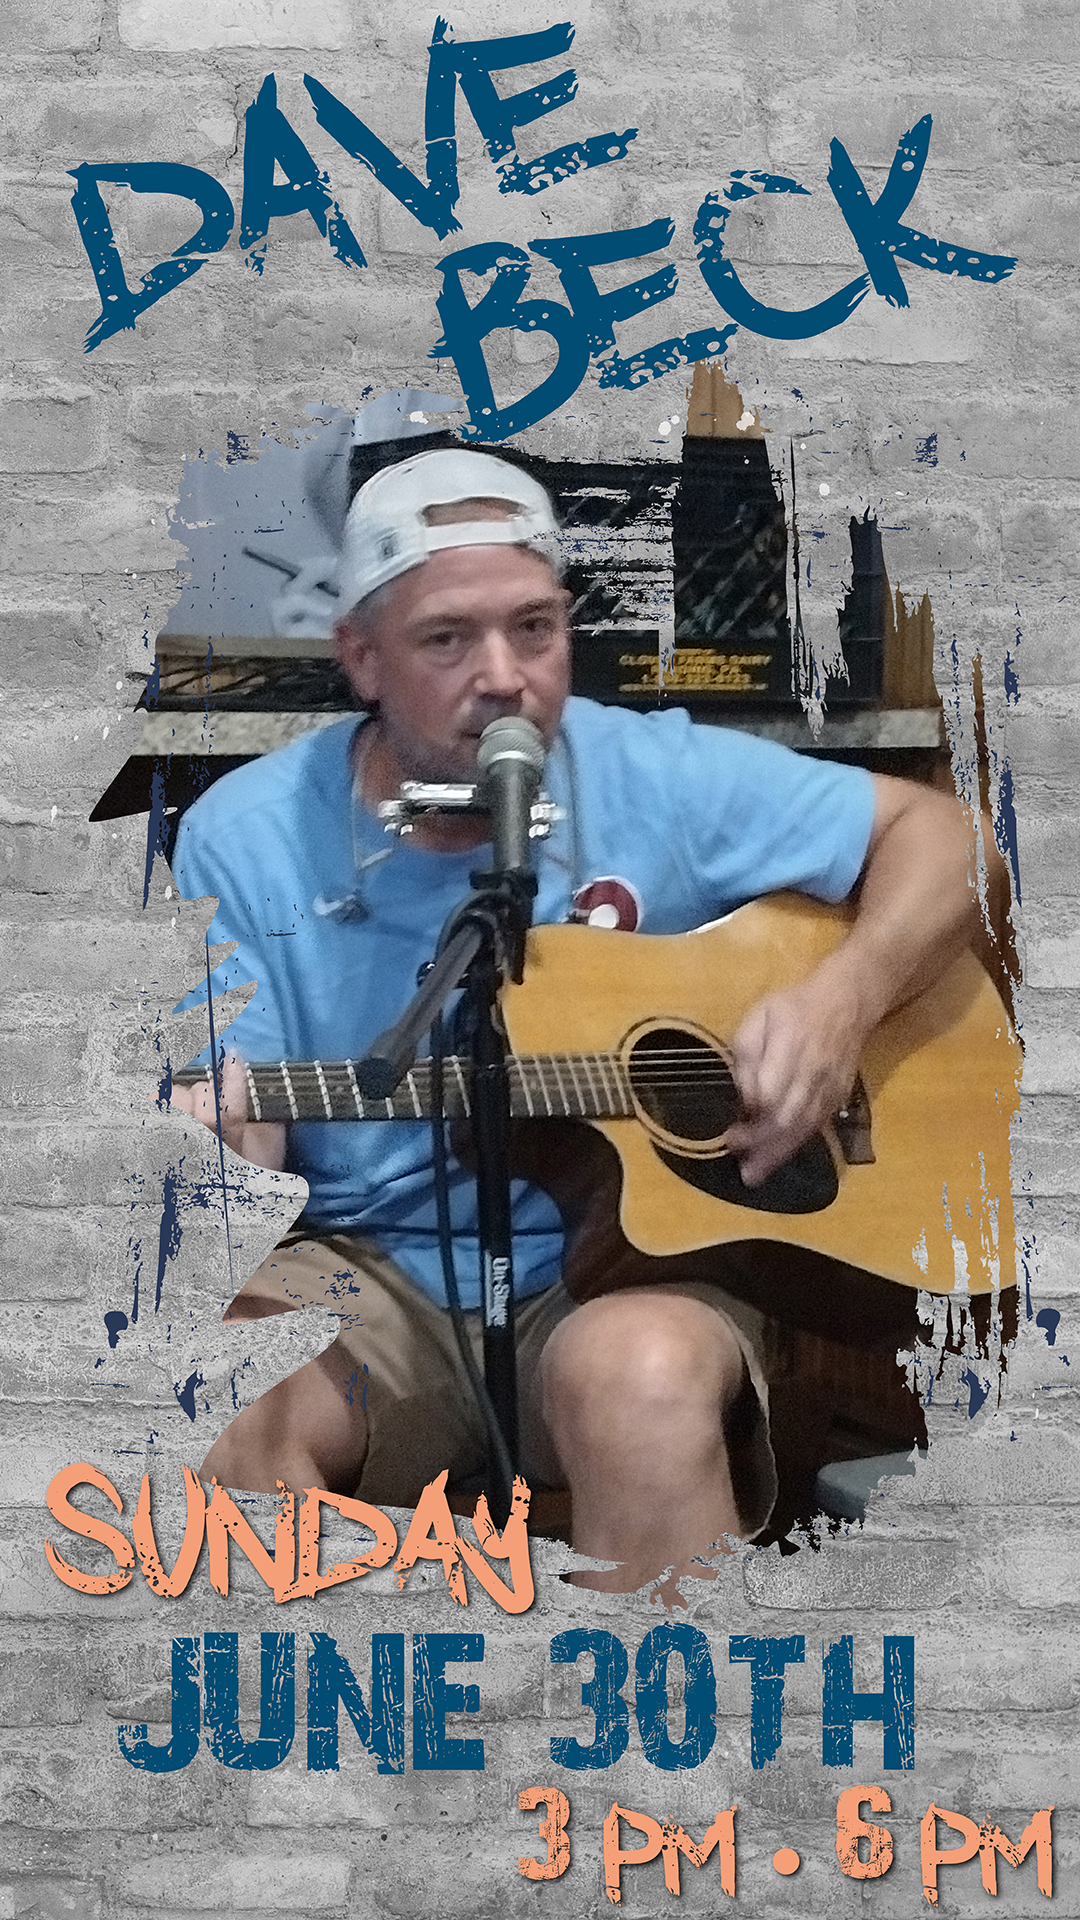 Man playing acoustic guitar and harmonica, wearing a blue shirt and a white cap. Text overlay indicates the event is with "Dave Beck" on Sunday, June 30th, from 3 PM to 6 PM.